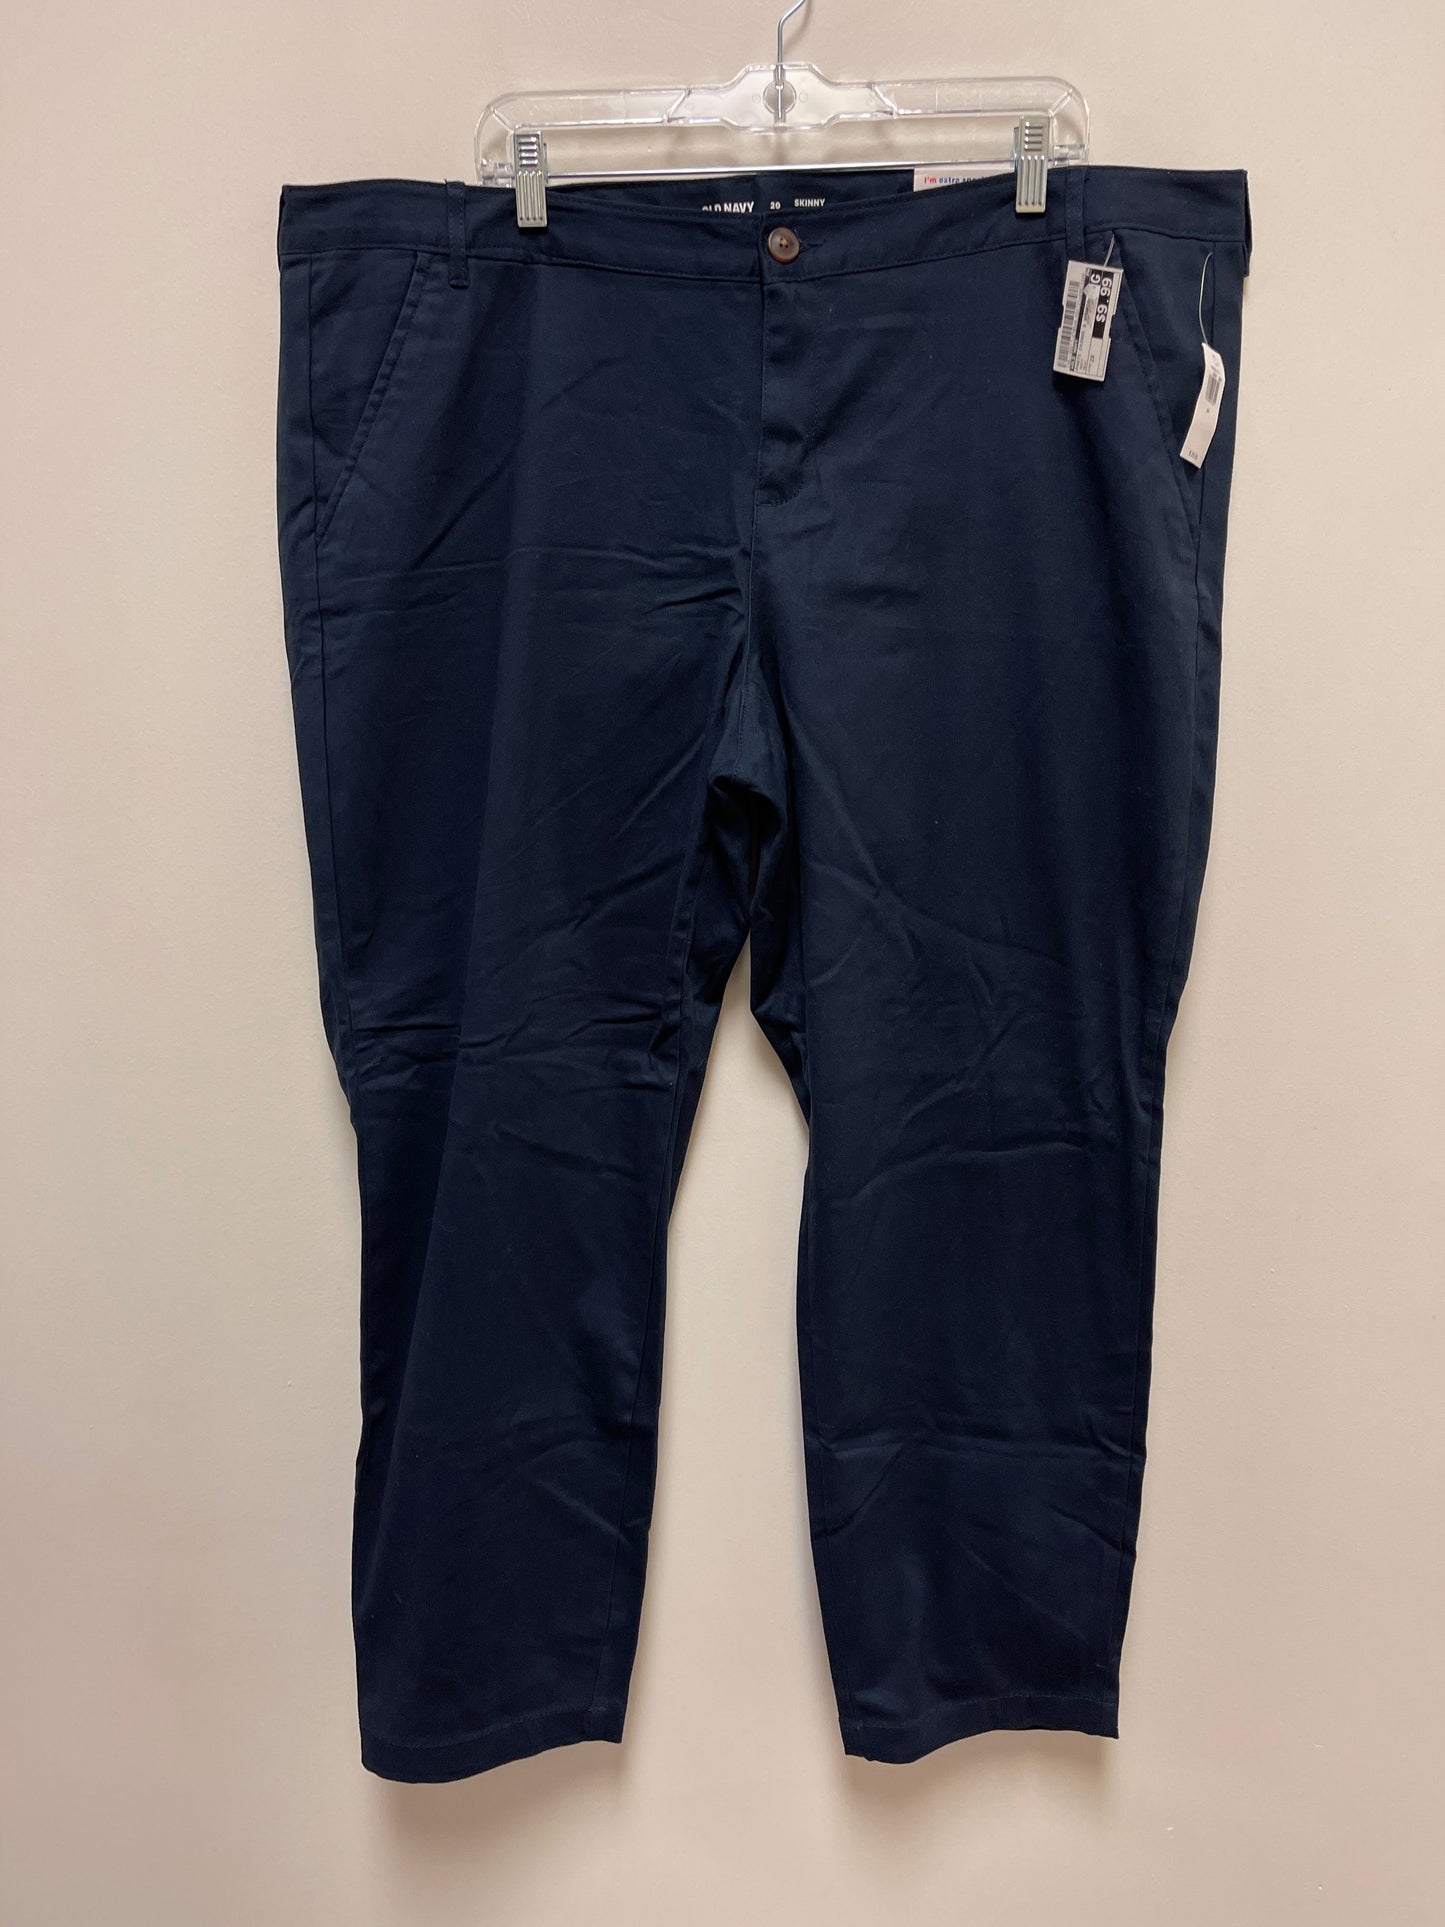 Navy Pants Chinos & Khakis Old Navy, Size 2x